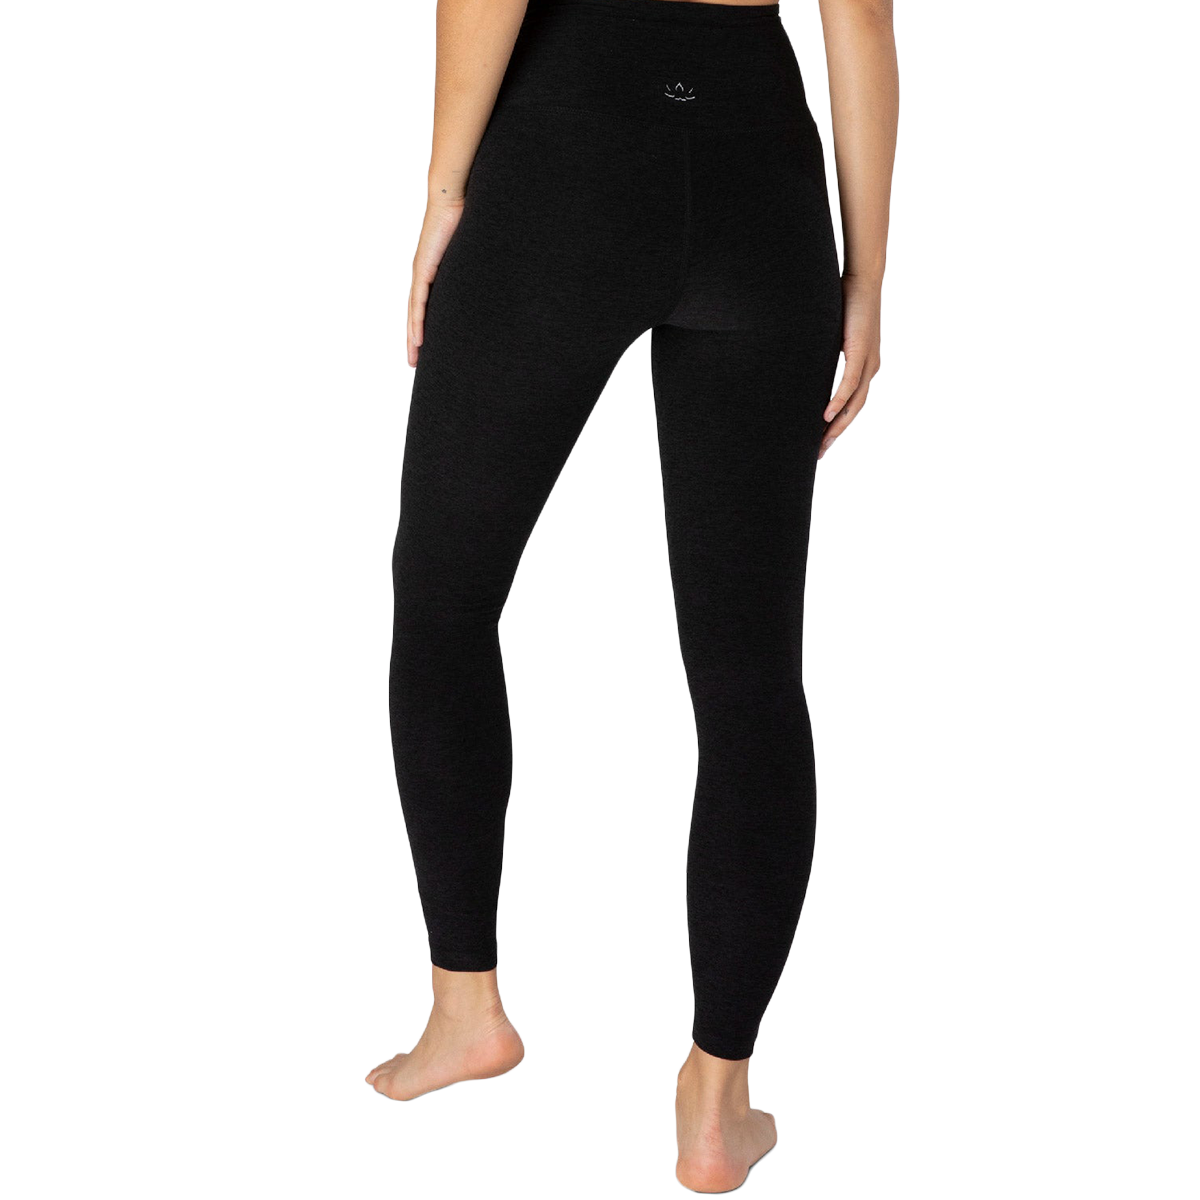 Women's Spacedye At Your Leisure High Waisted Legging